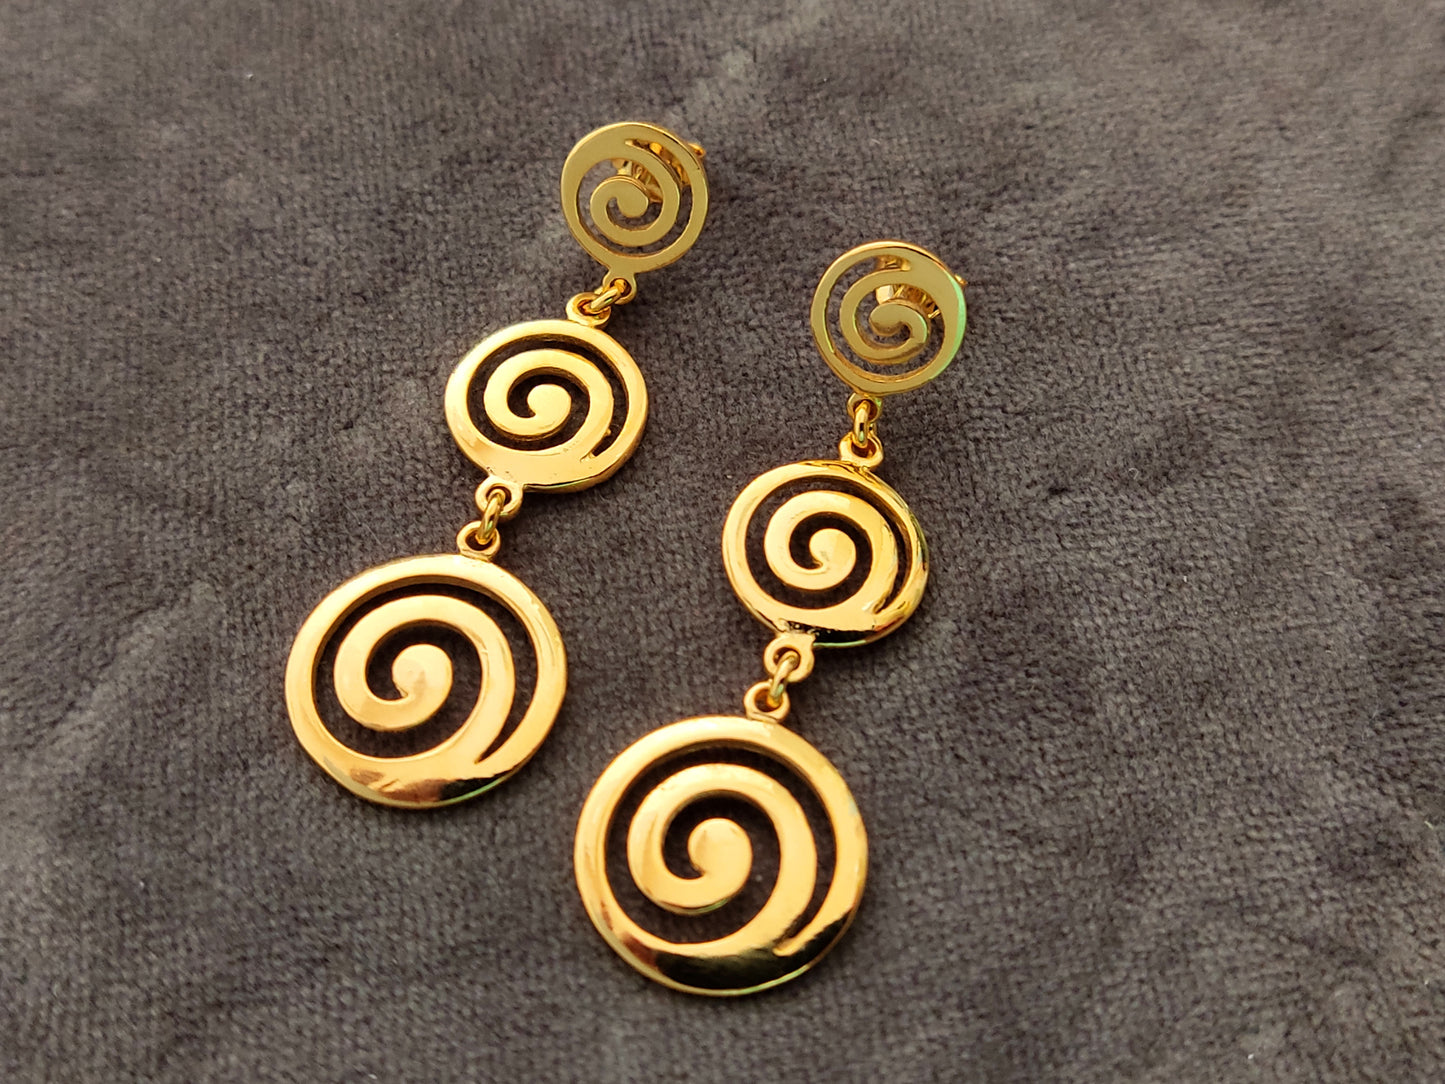 Greek spiral dangle long earrings made of Sterling Silver 925 with gold plated finish on gray velvet.